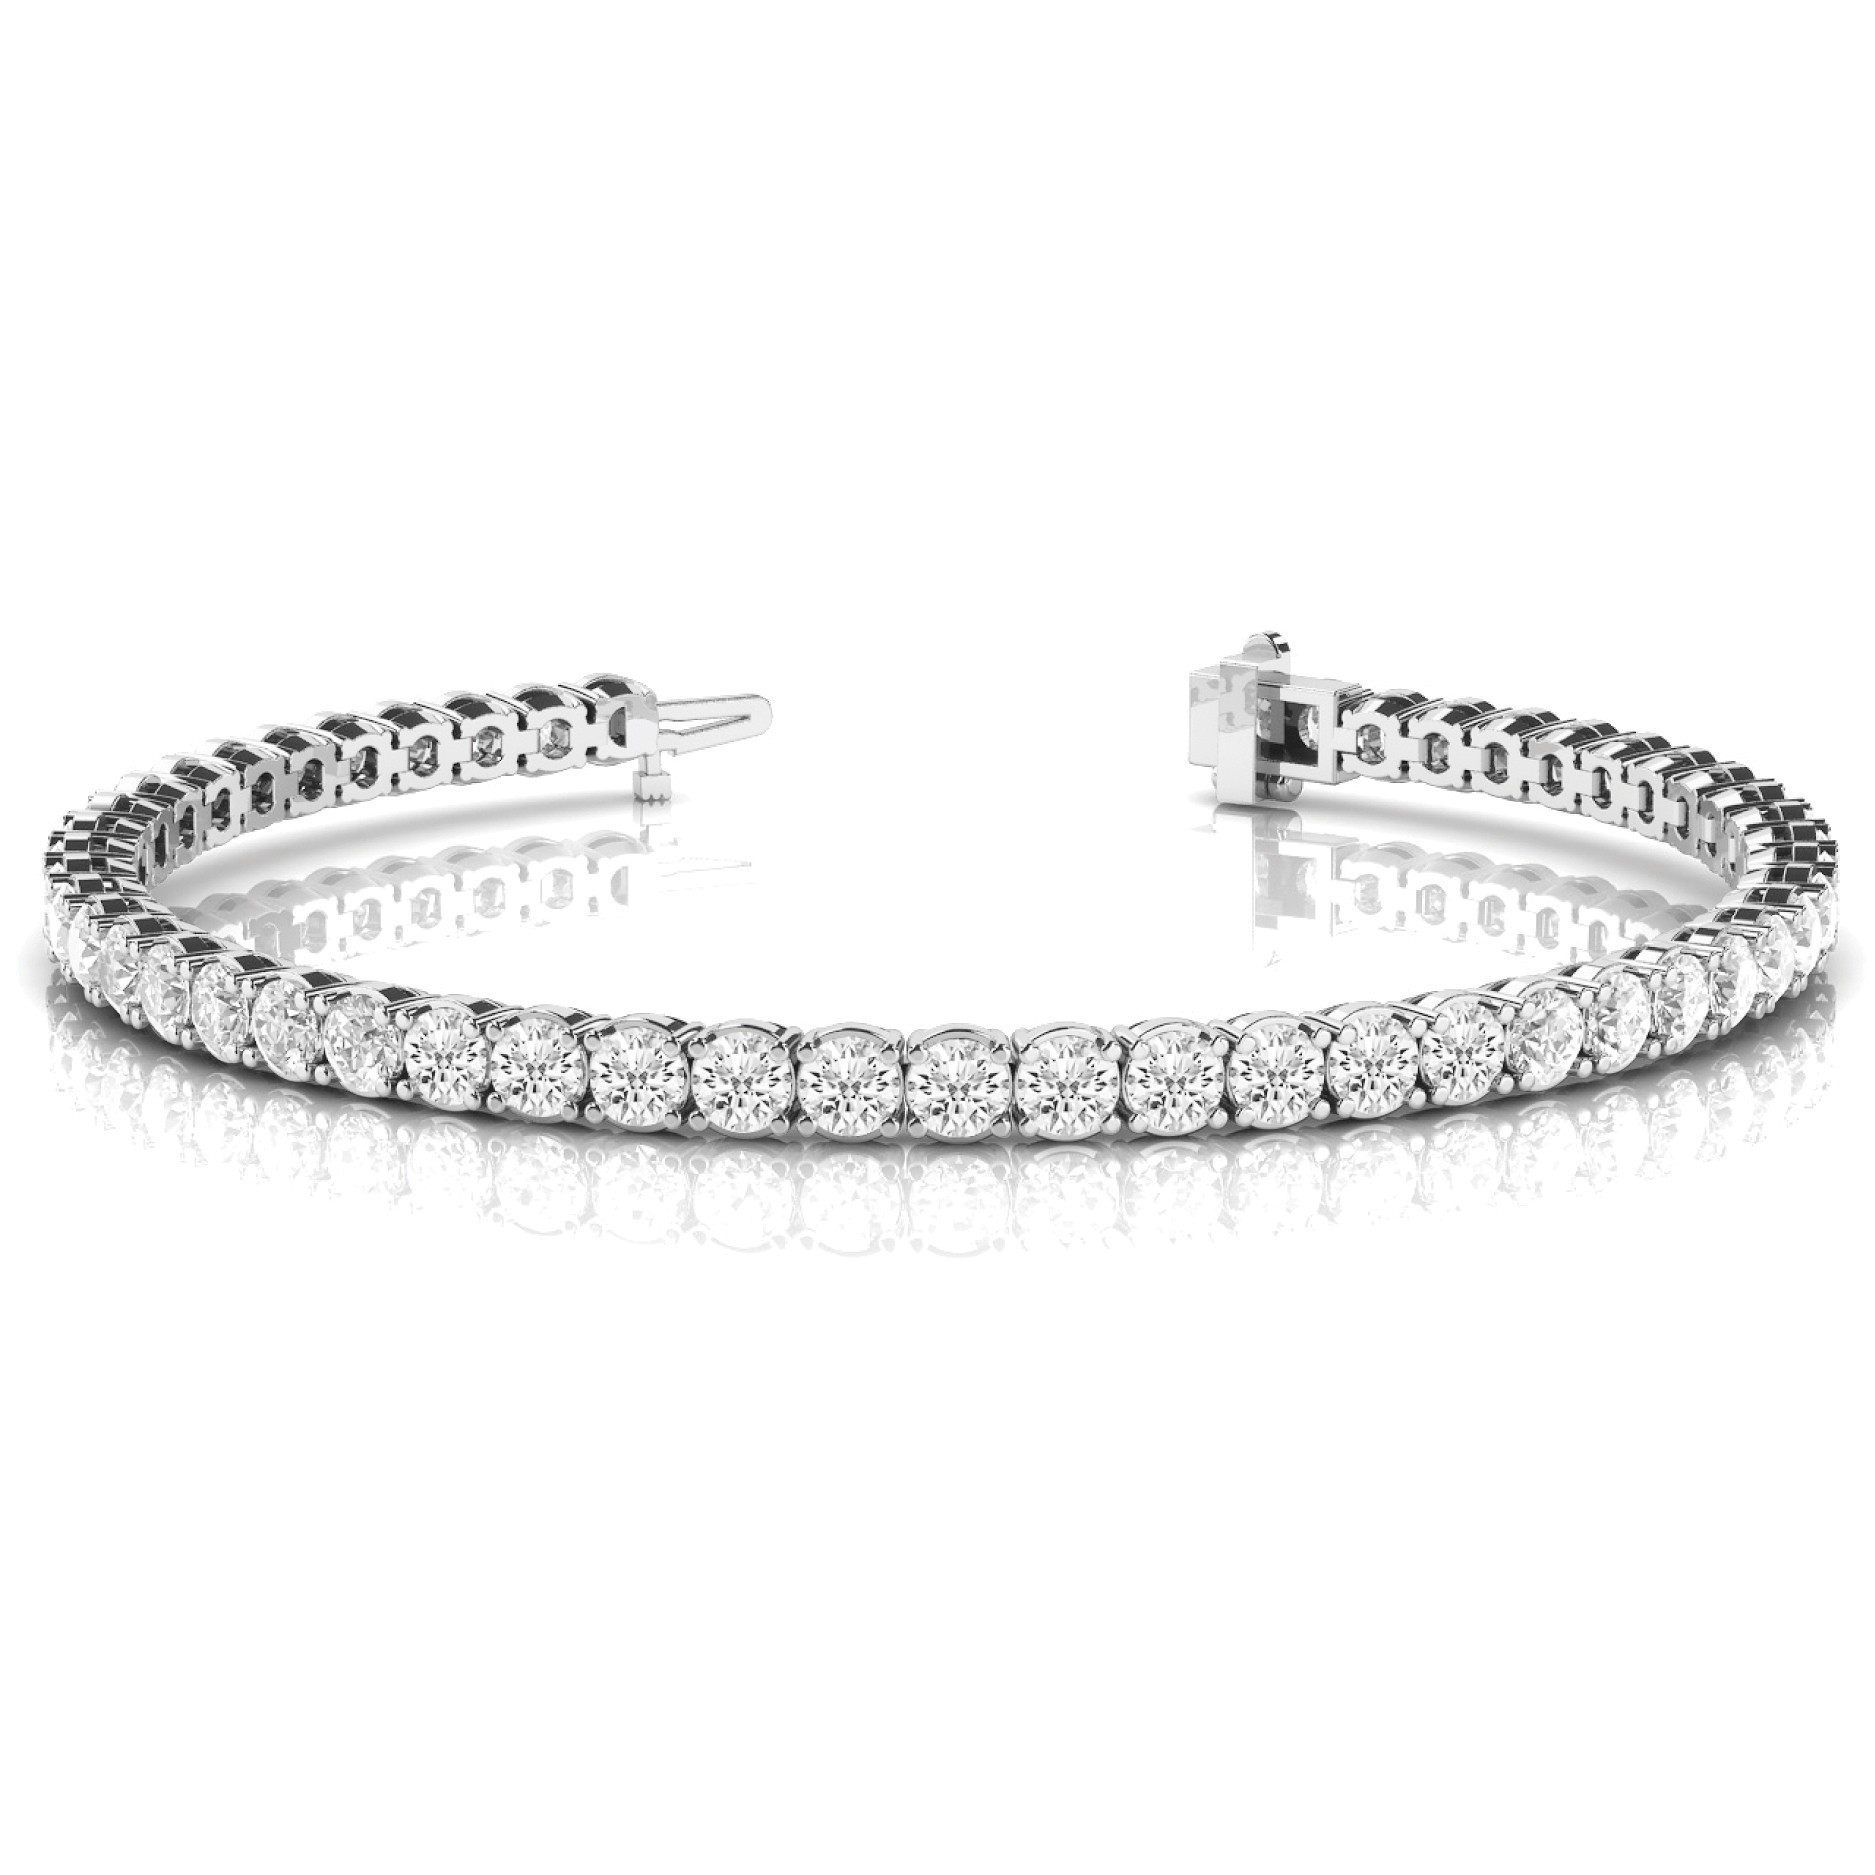 2.25 - 15.00 Carat Round Natural And Lab Created Diamond Tennis Bracelet With 4 Prong Setting